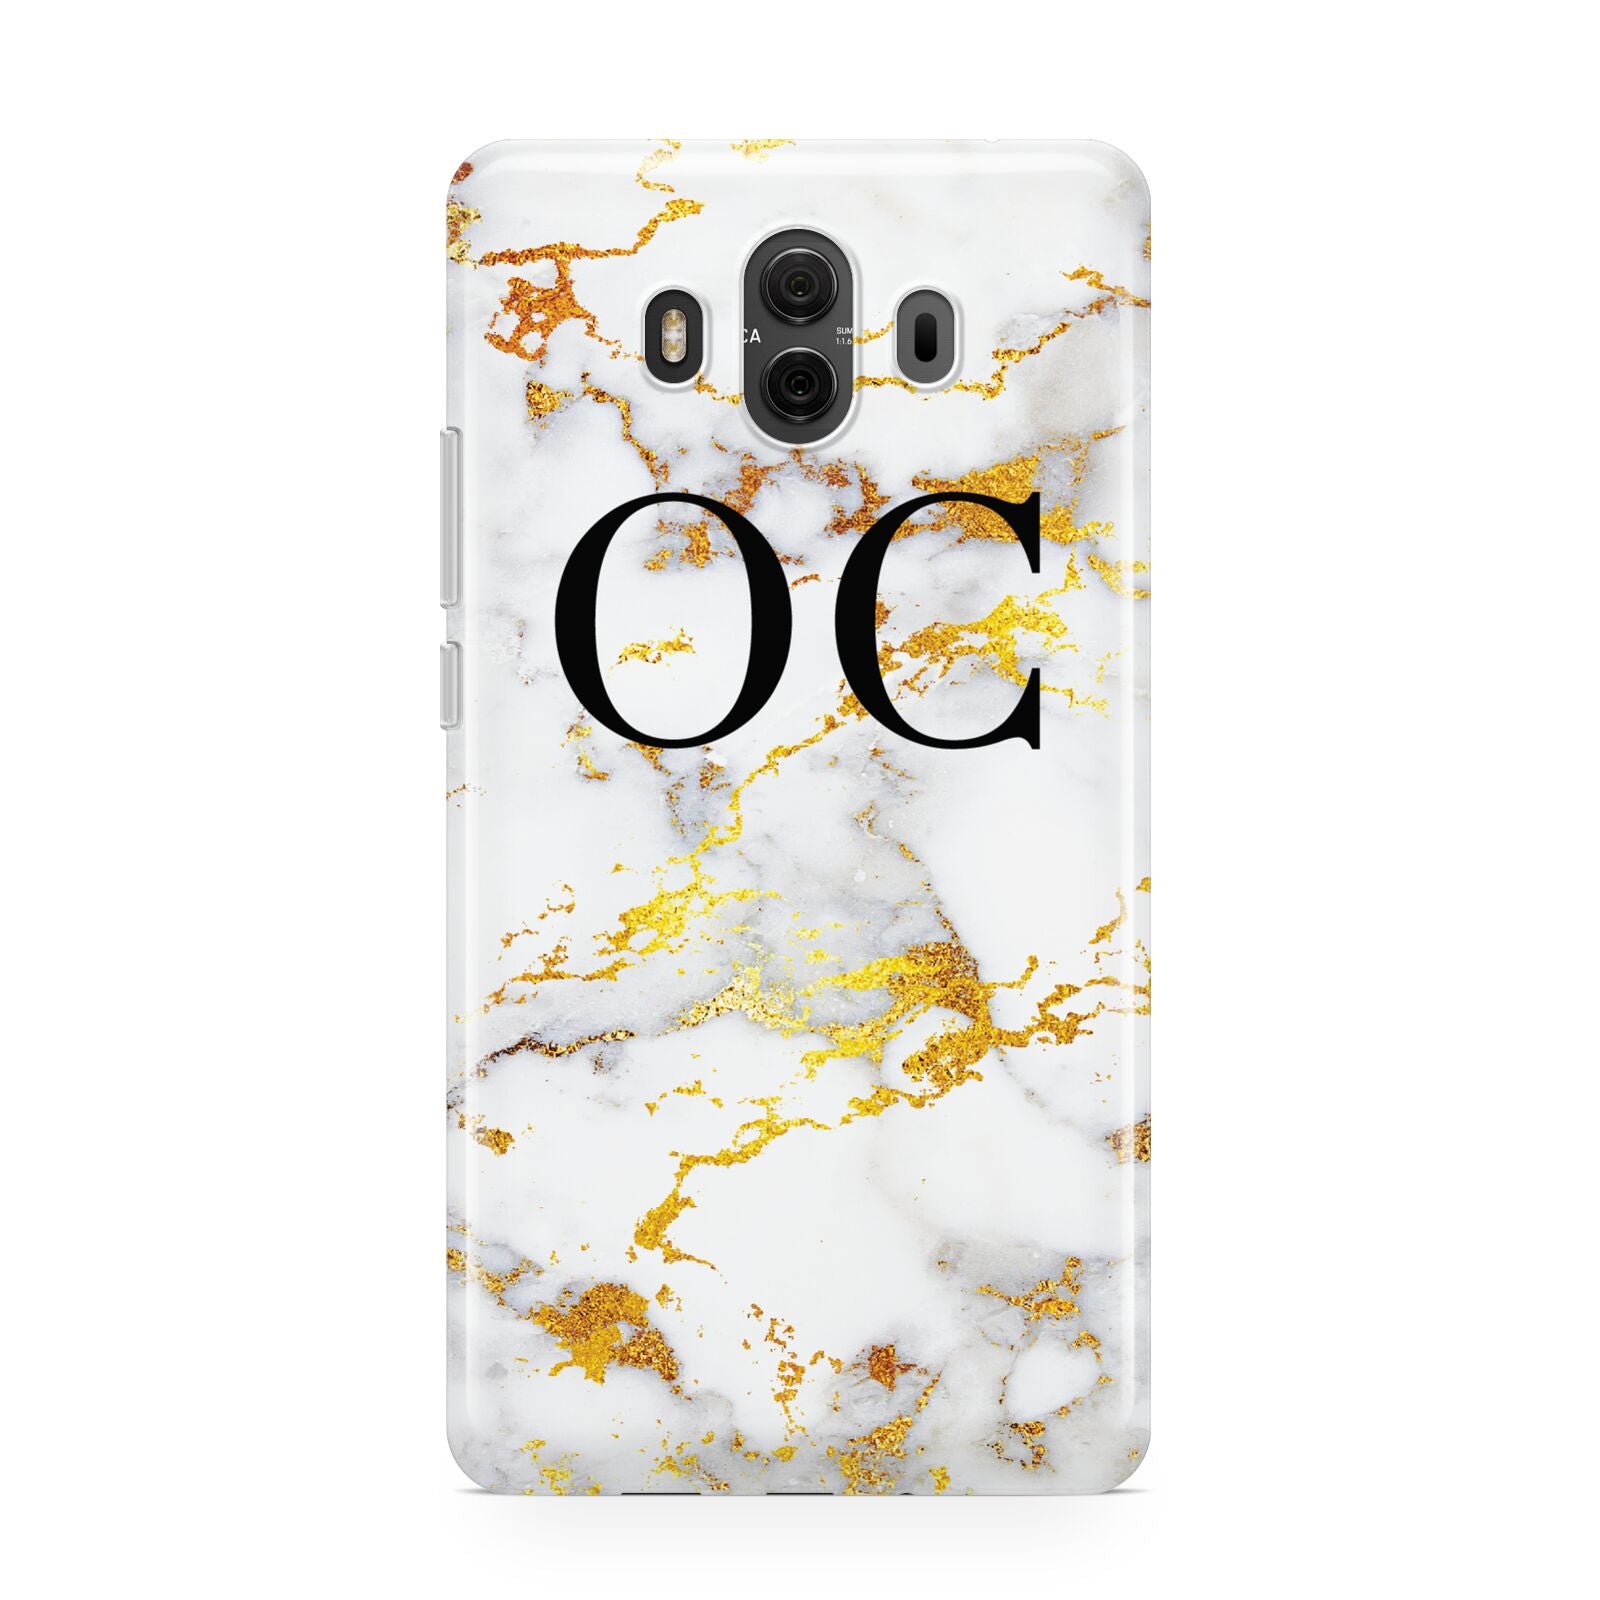 Personalised Gold Marble Initials Monogram Huawei Mate 10 Protective Phone Case